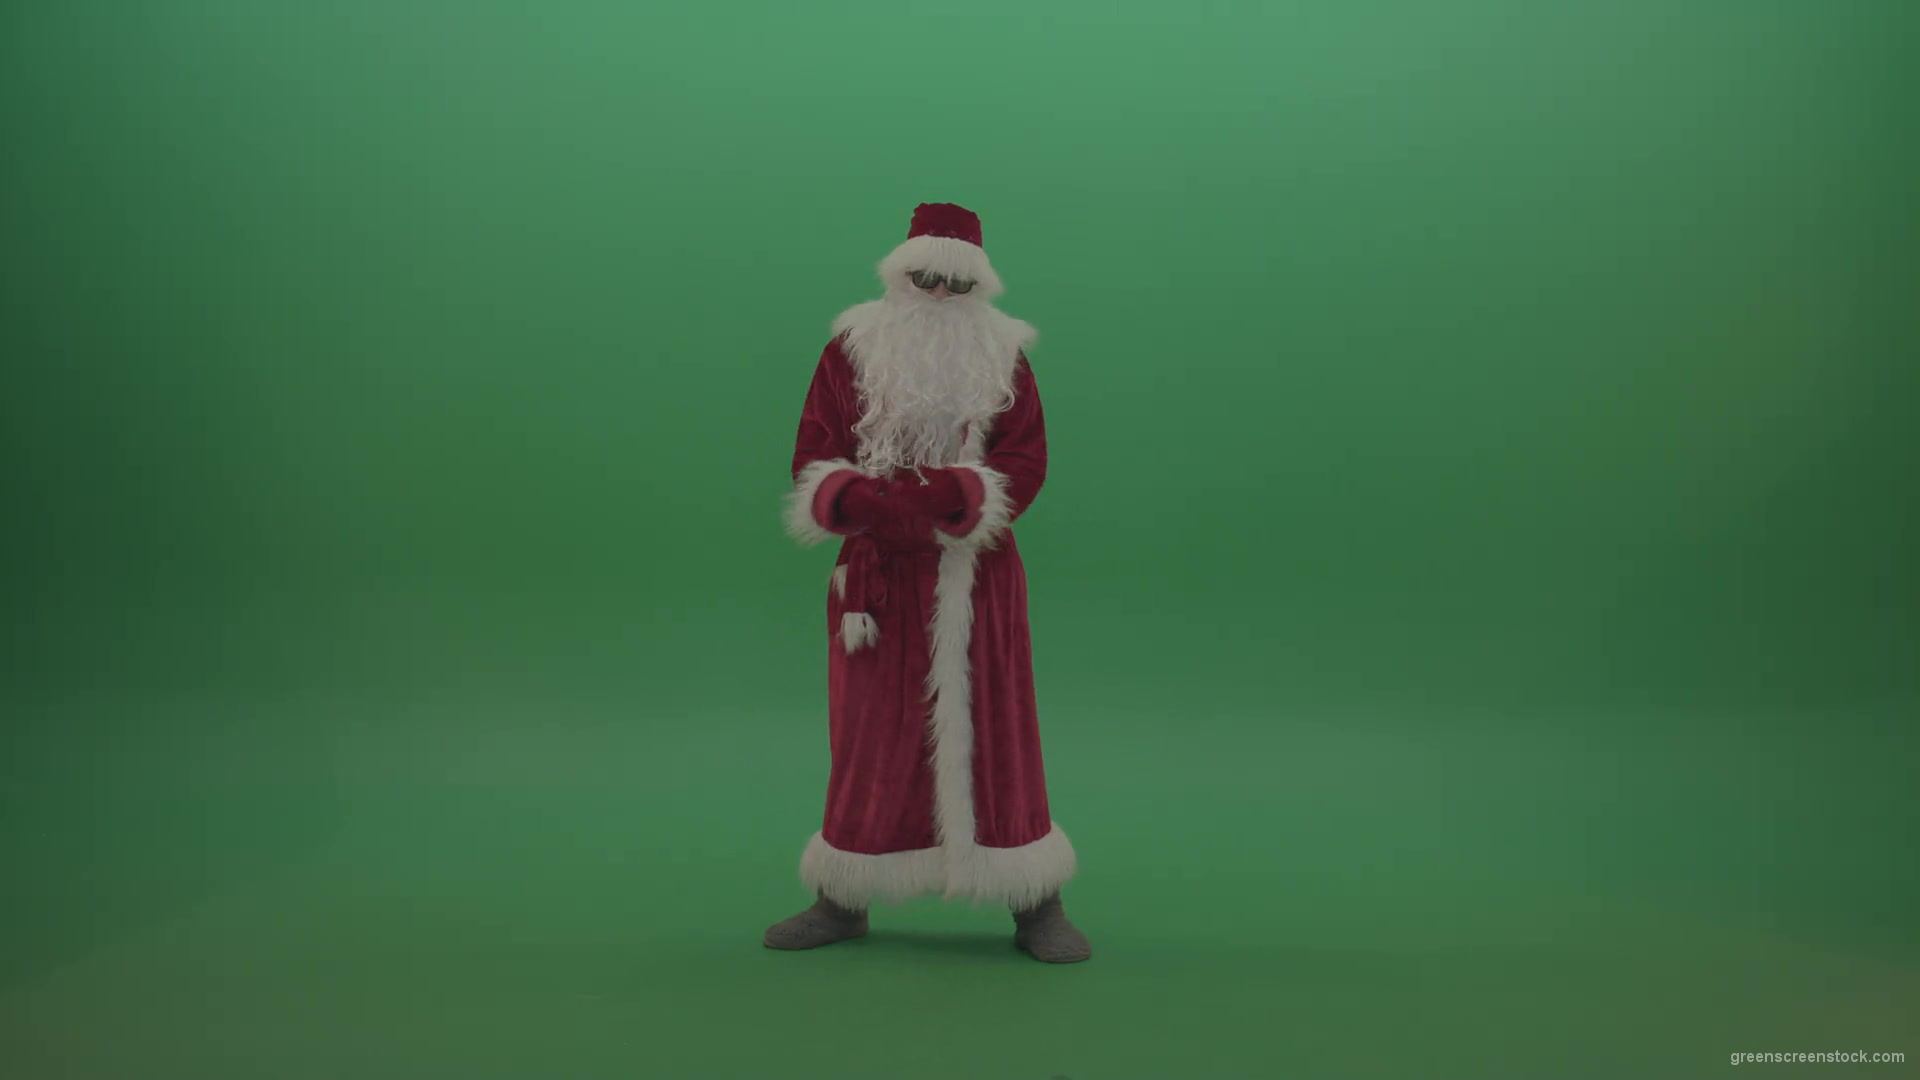 Man-takes-off-his-santa-costumes-over-green-screen-background-1920_002 Green Screen Stock